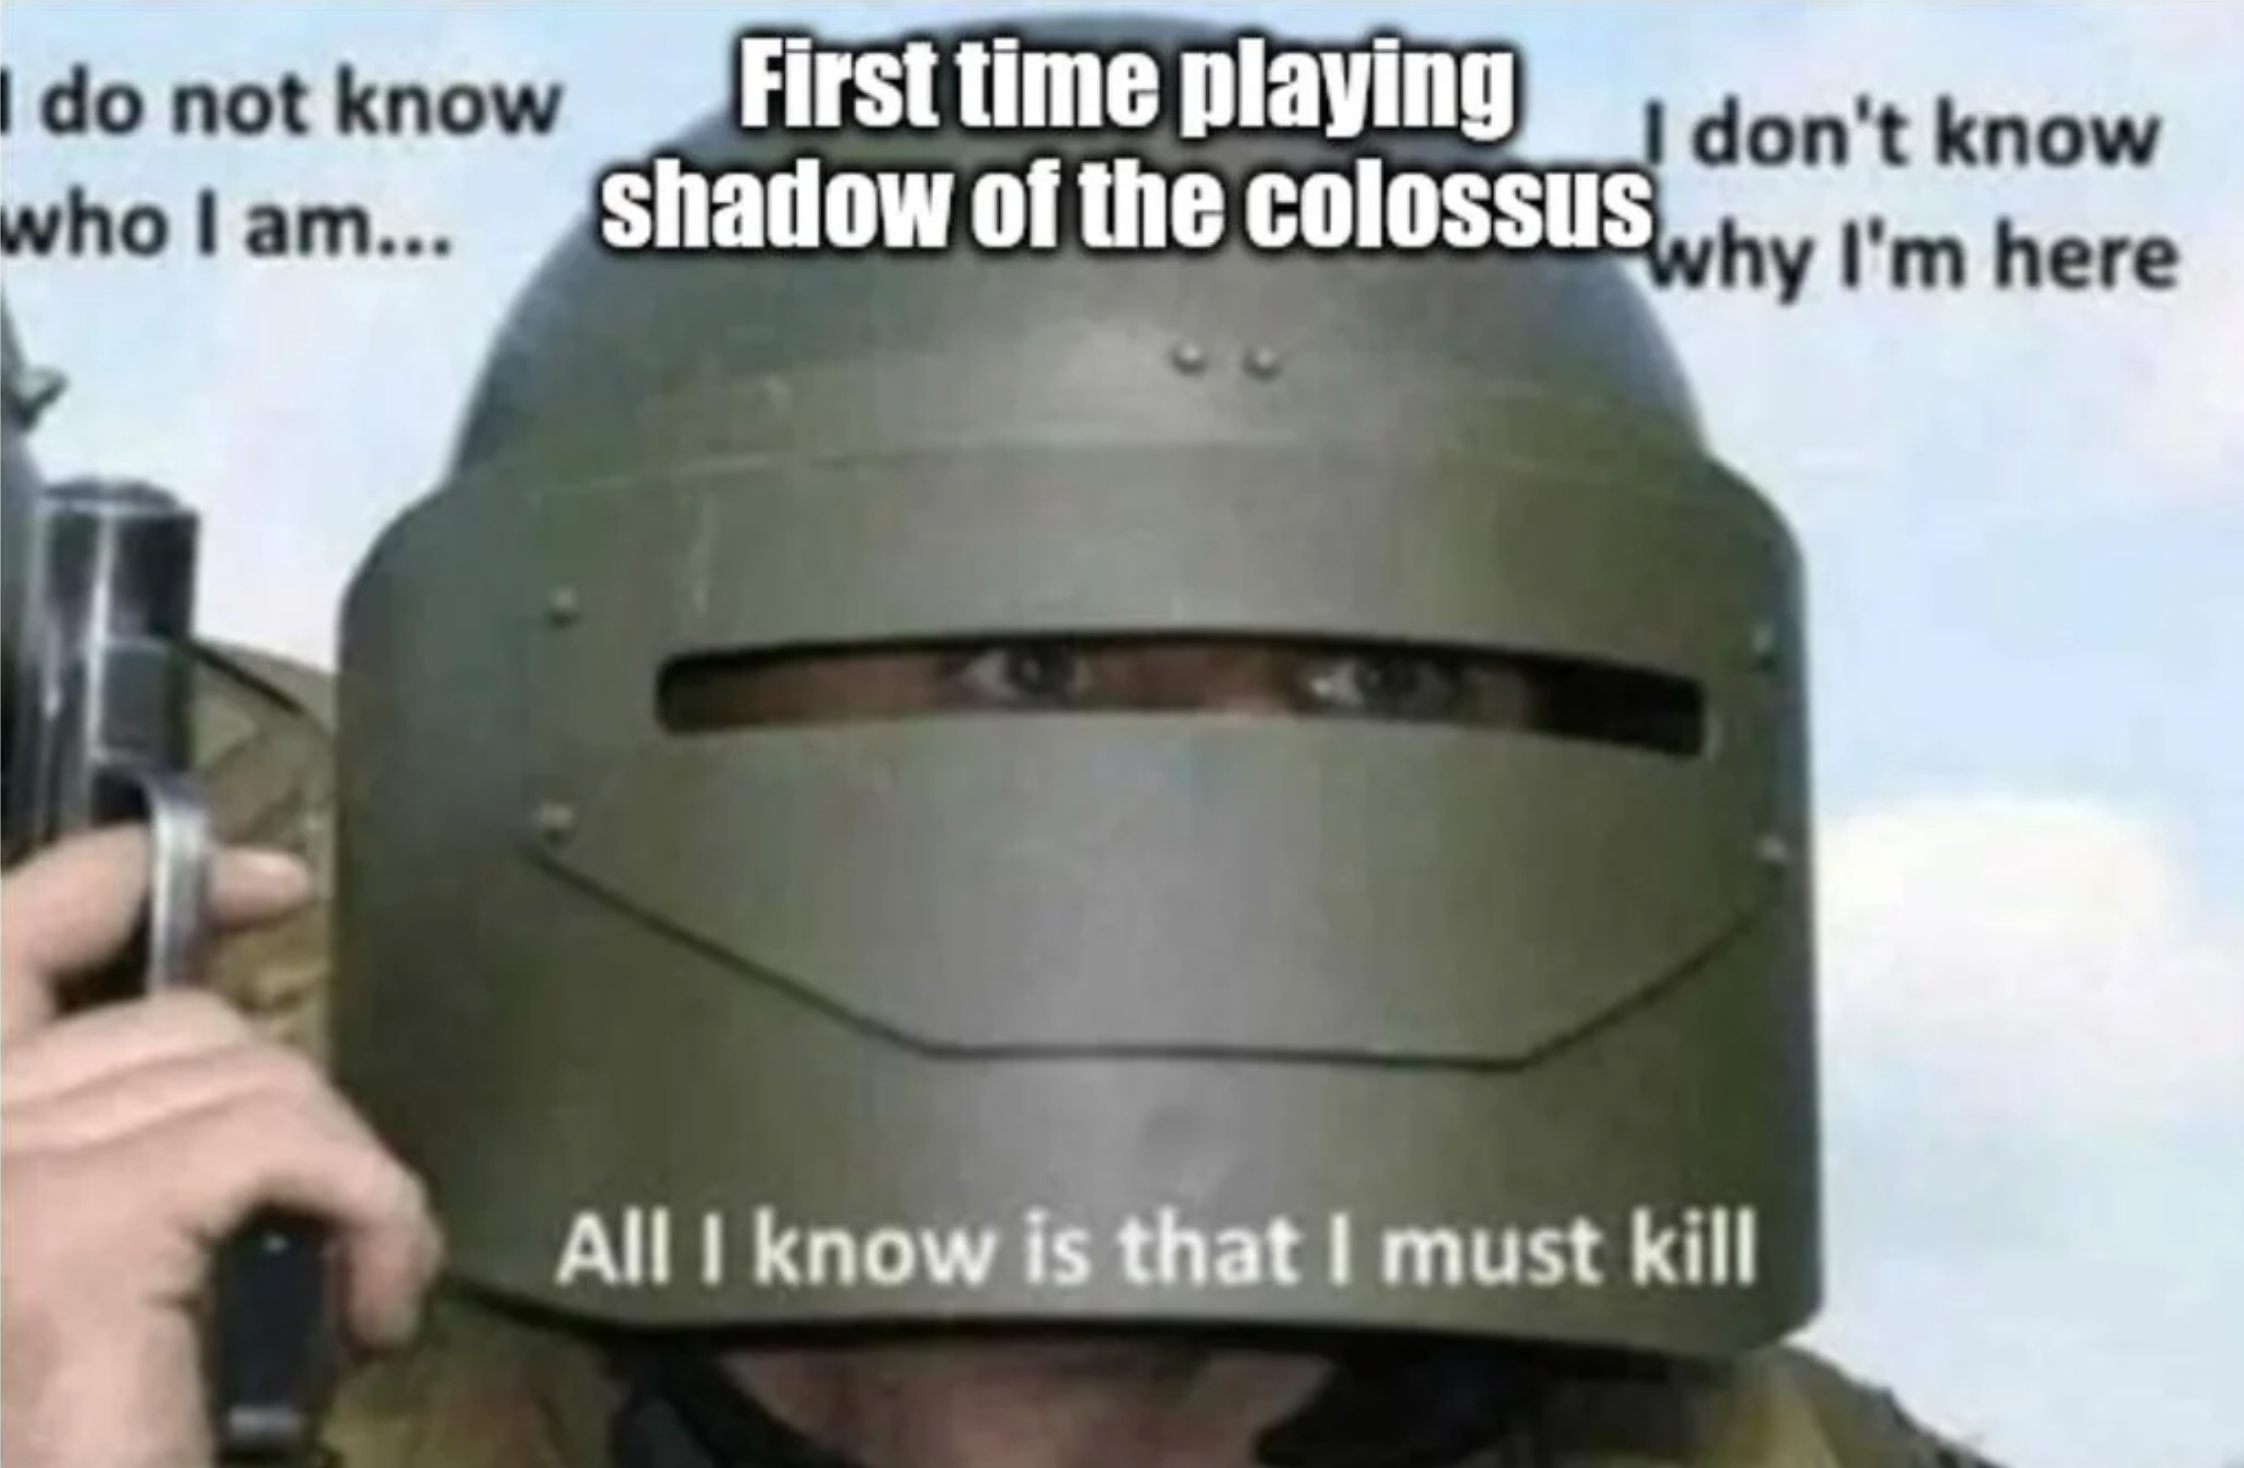 funny gaming memes - don t know who i am i don t know why - do not know First time playing I don't know who I am... shadow of the colossus why I'm here All I know is that I must kill